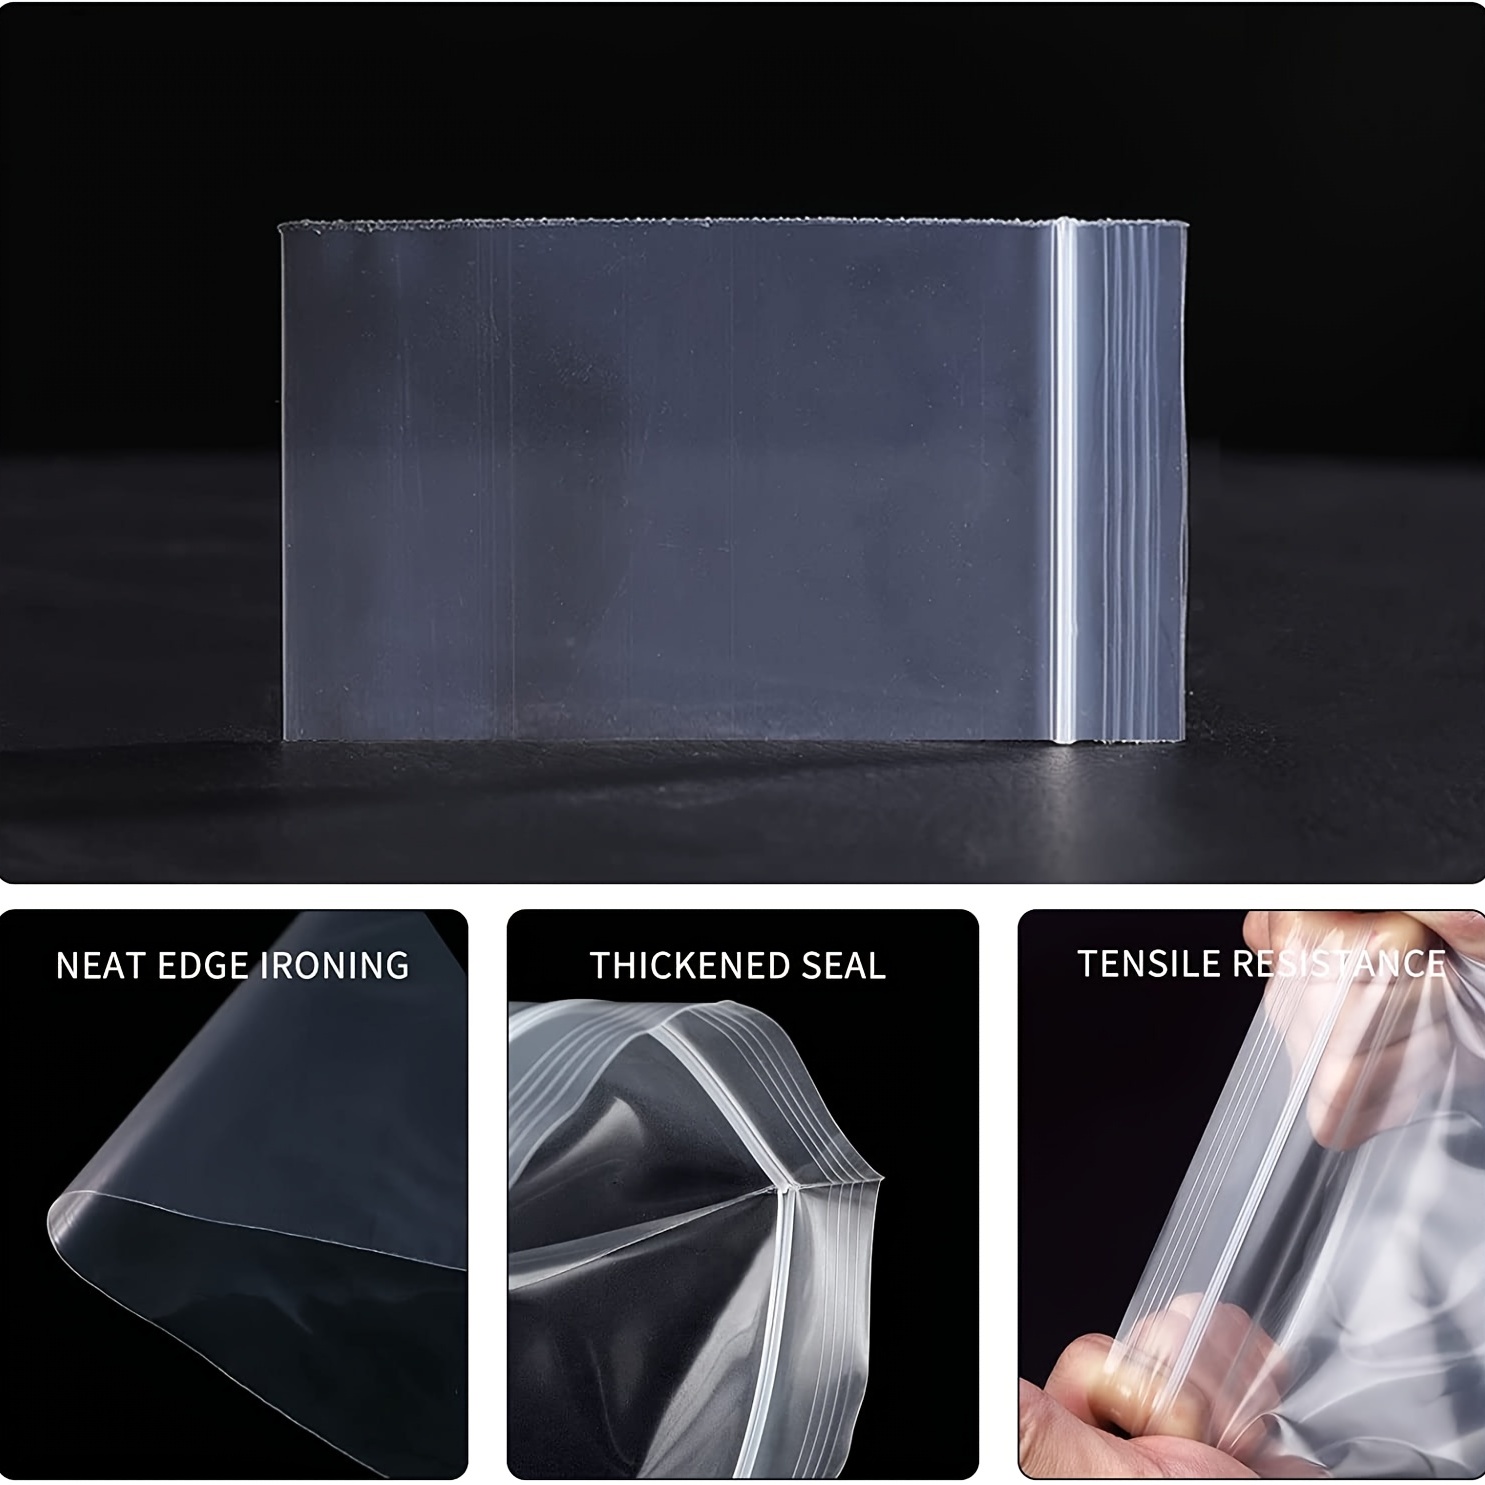 How to choose Size and Thickness for Resealable Zipper bag